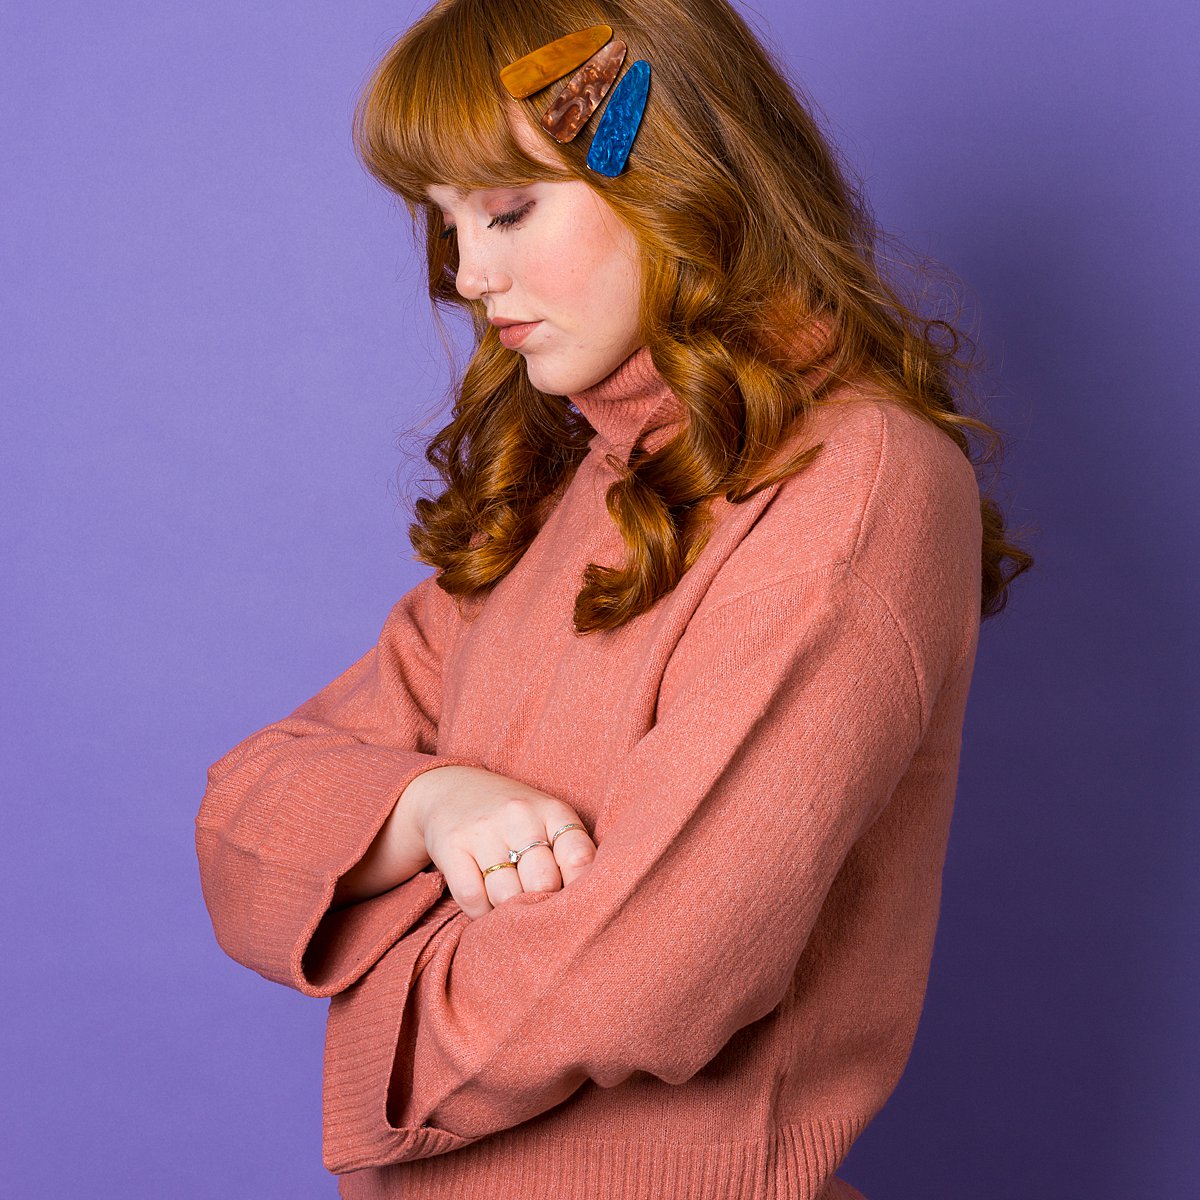 Colourful content creation for Crown & Glory hair accessories. AW19 product photography by Marianne Taylor.